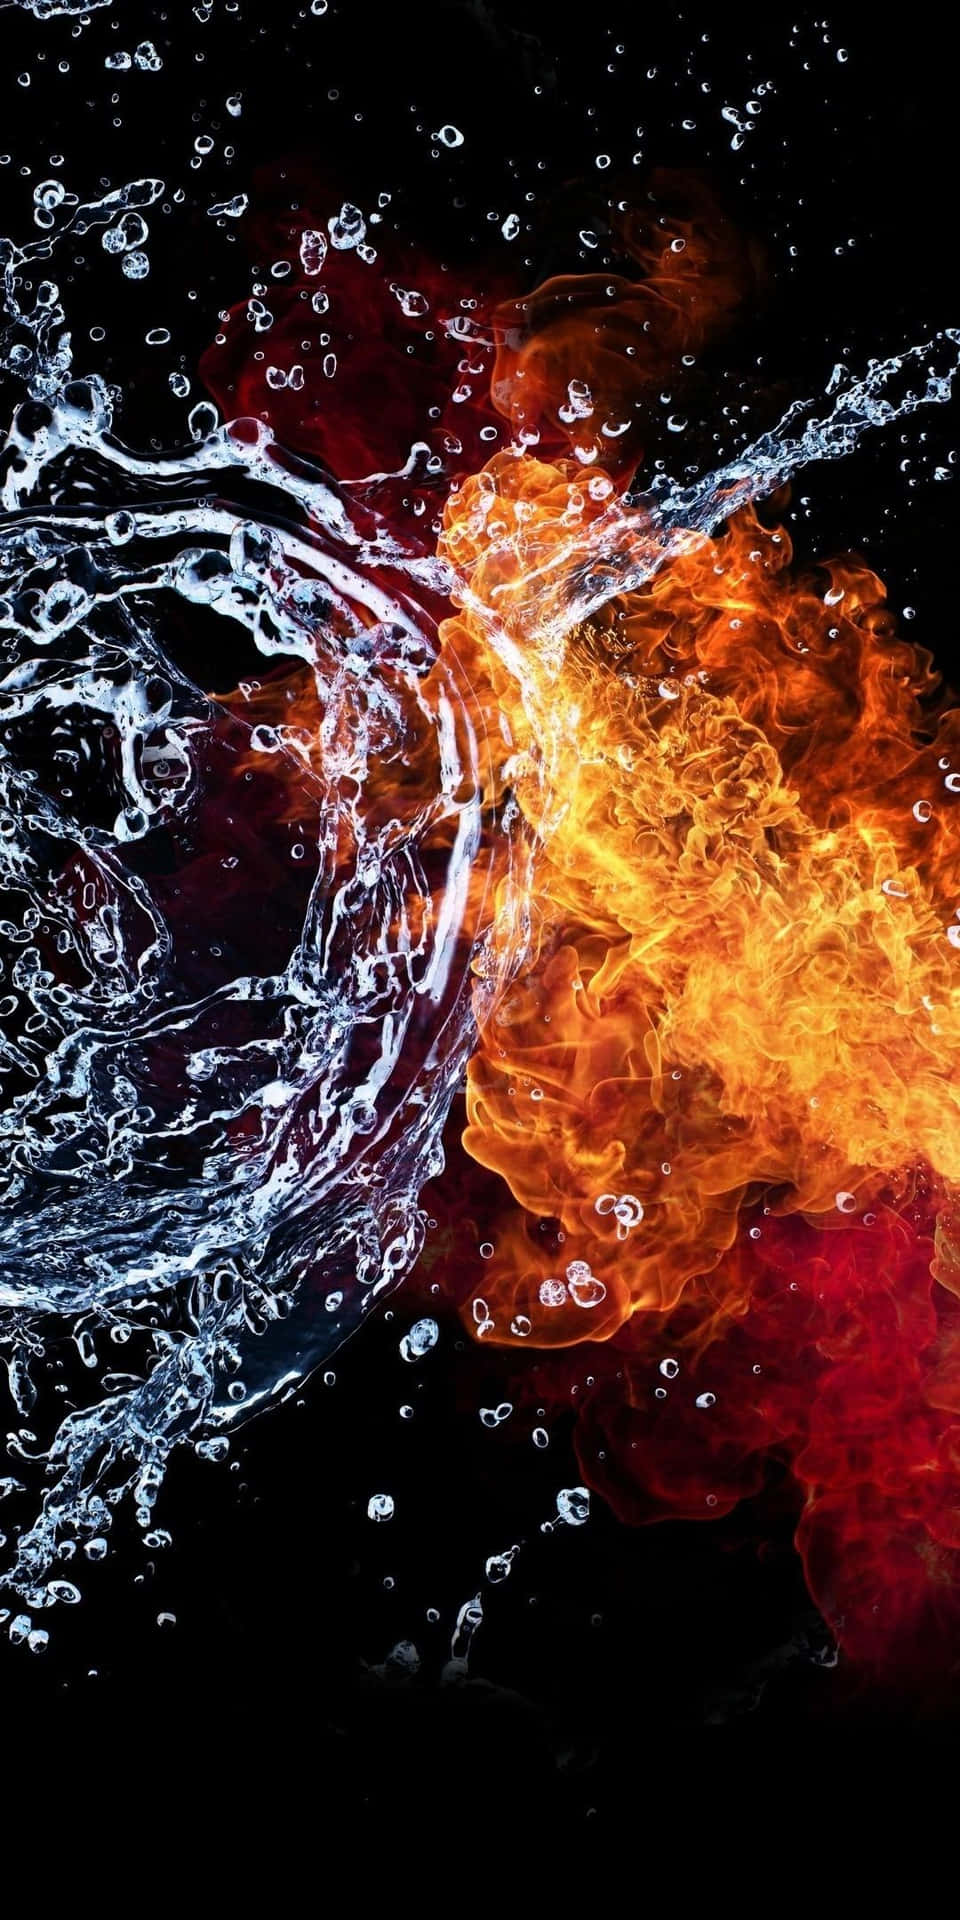 Fire meets Water in an Explosive Collision Wallpaper